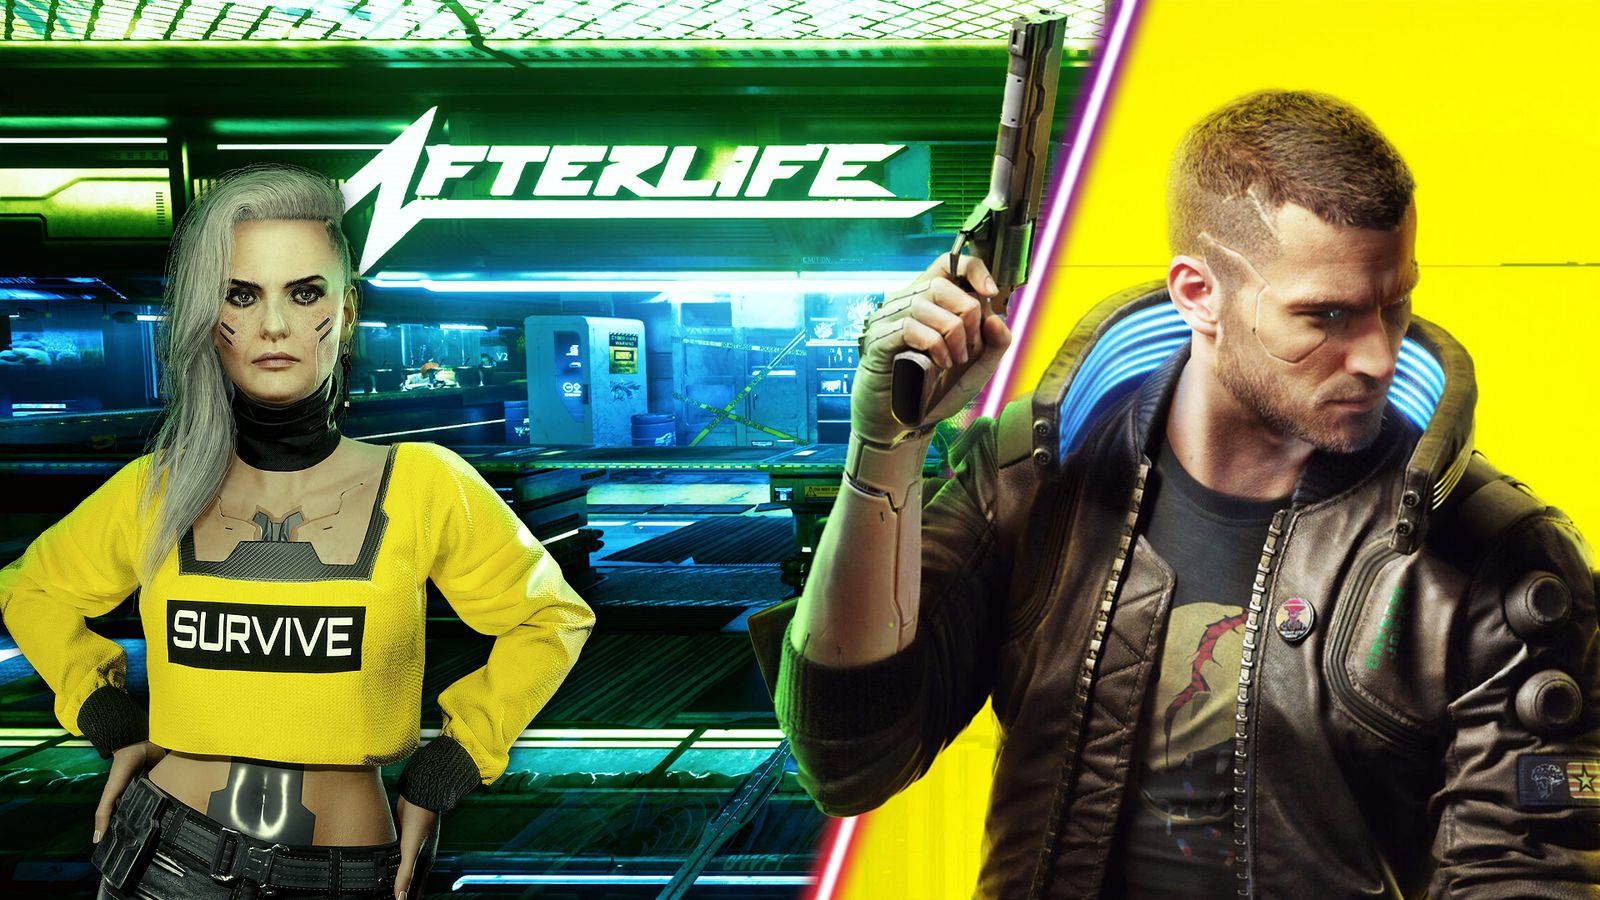 Cyberpunk 2077's The Afterlife.